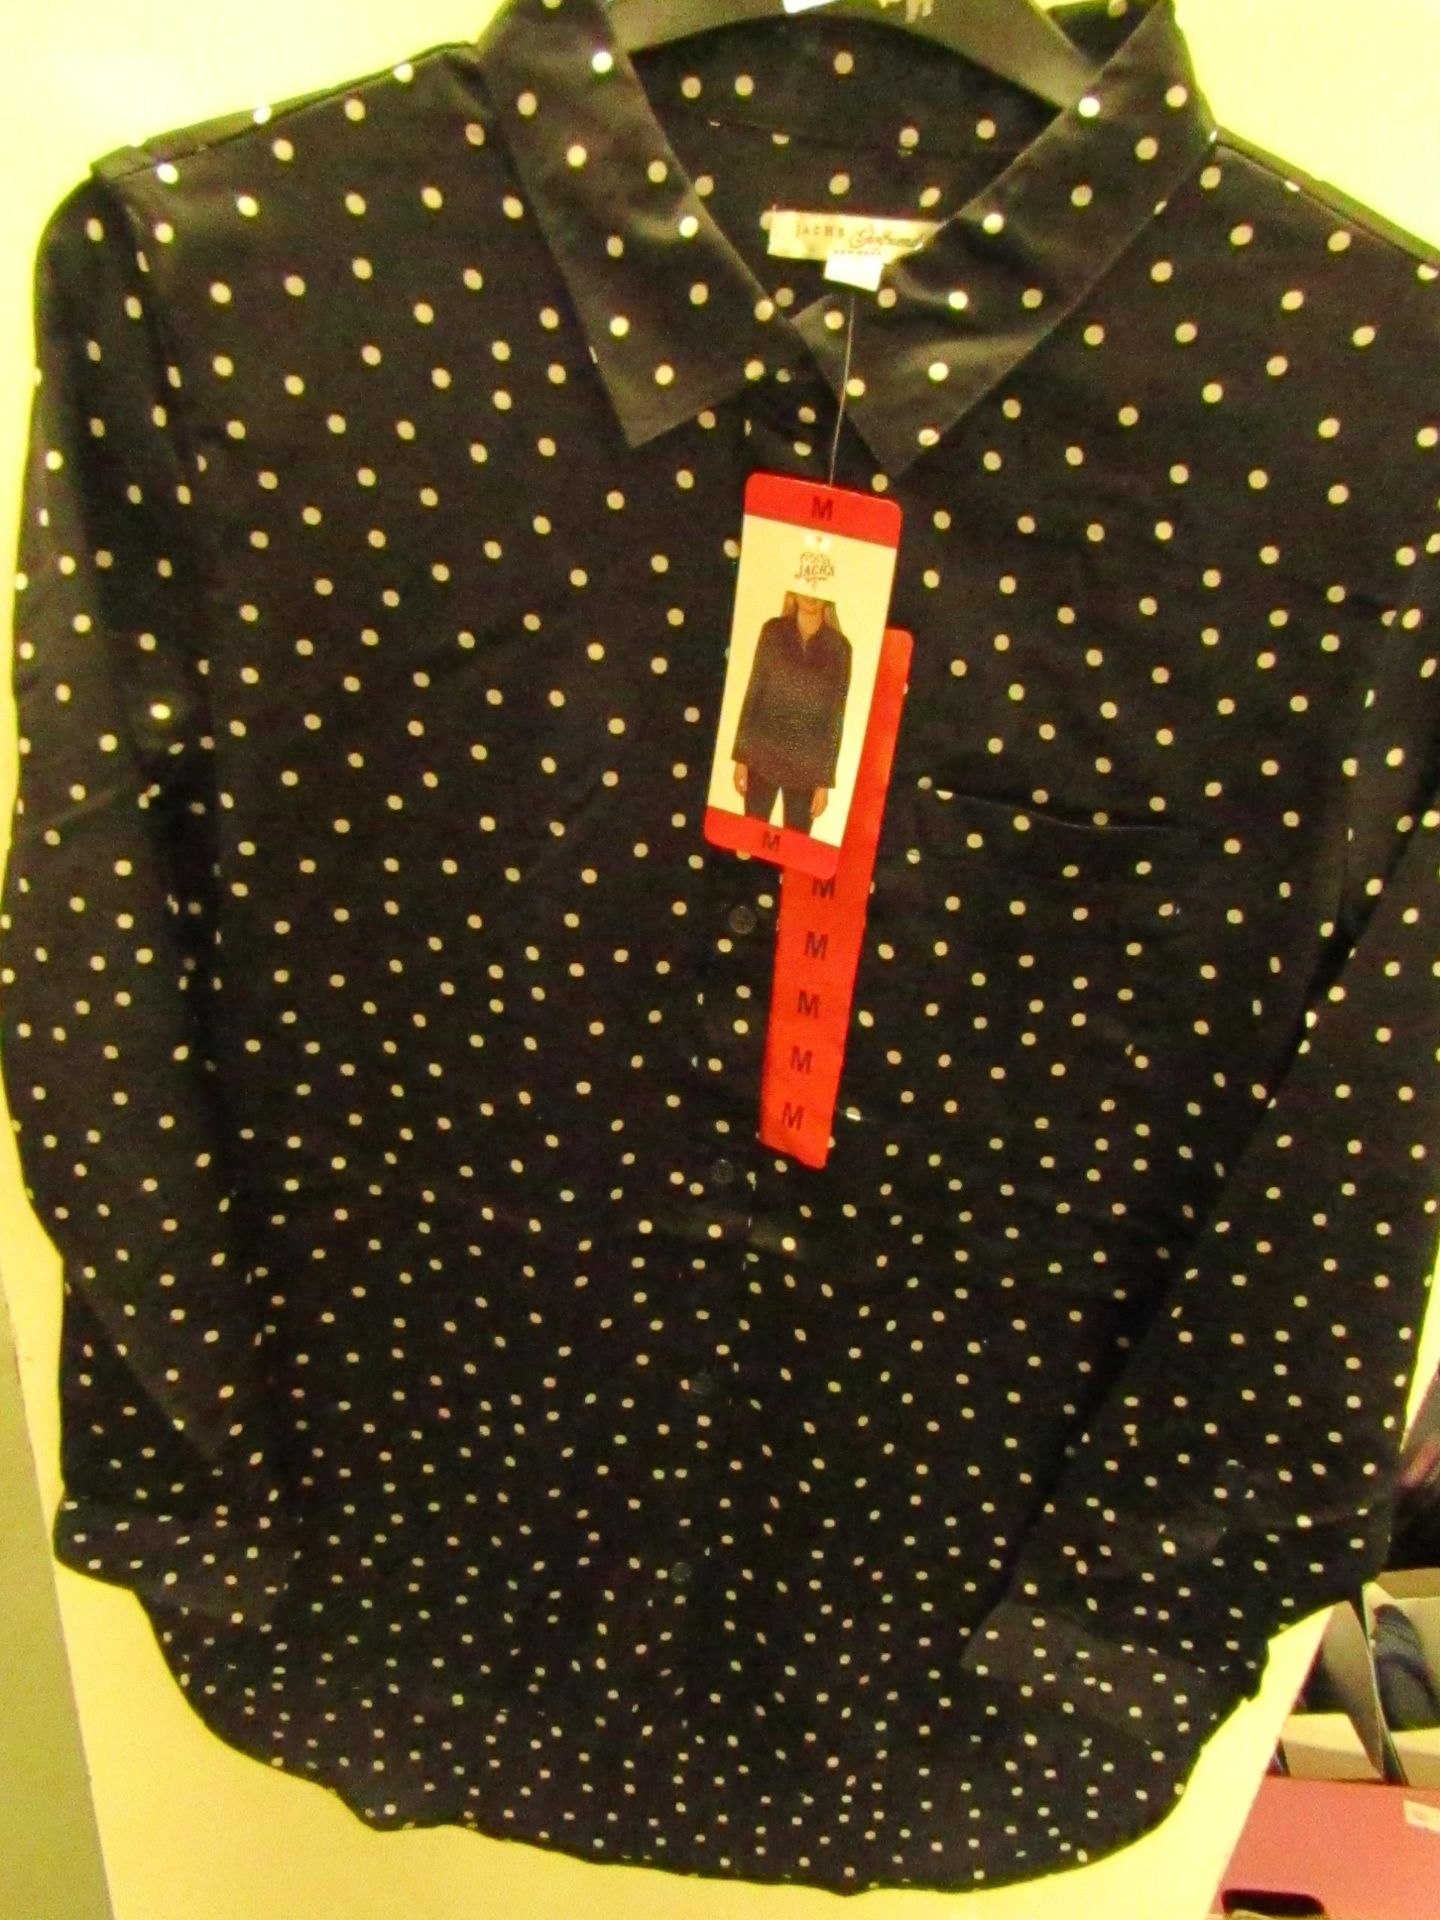 Jachs New York Girlfriends Blouse,Black/White Spots - Size M New With Tags